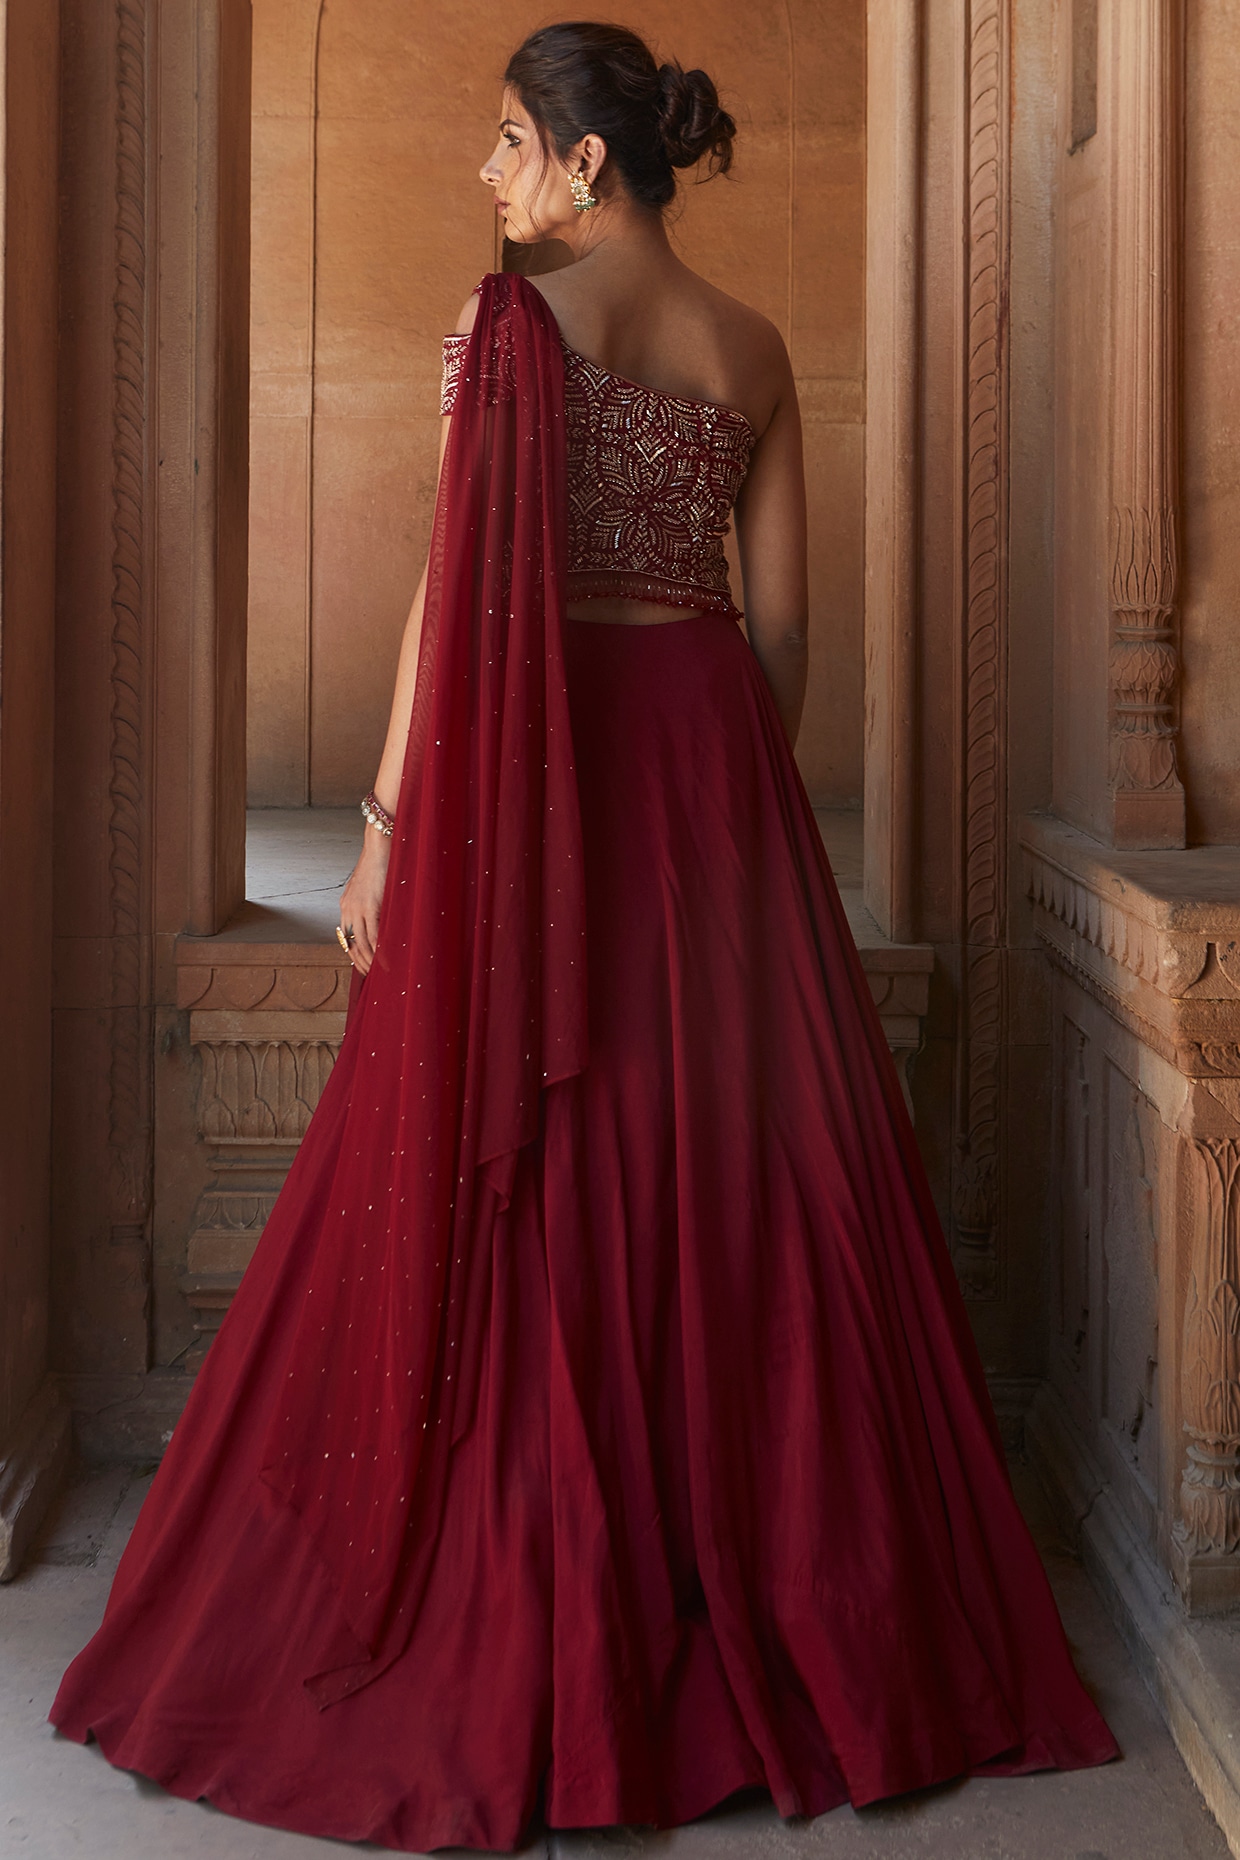 Designer Party Wear Gown with Dupatta in Wine Shade with Embroidery, G